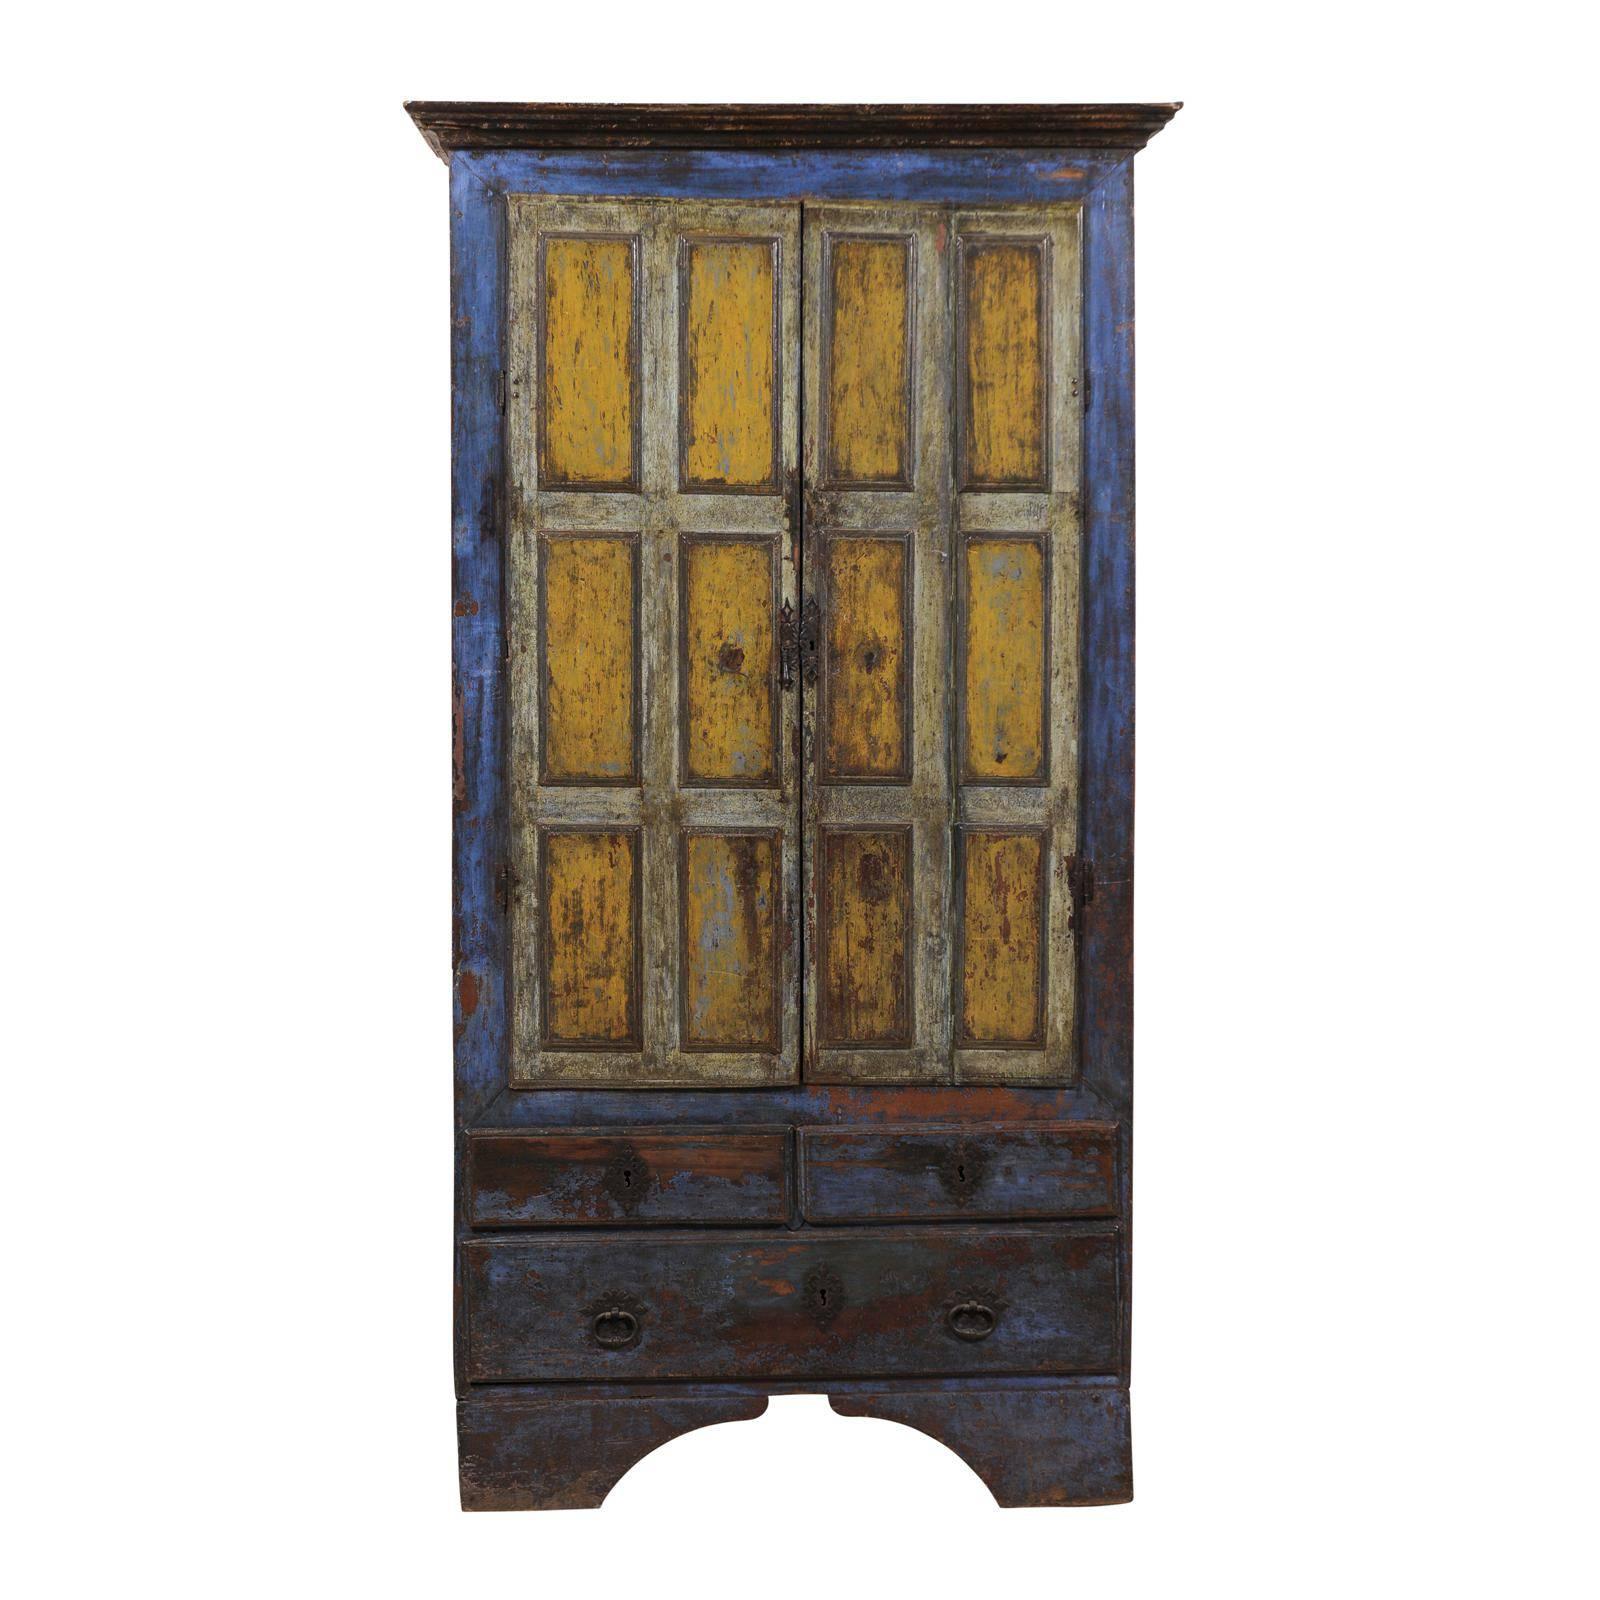 Early 19th C. Wood 2-Door Cabinet w/Drawers and Original Paint in Blue & Yellow 